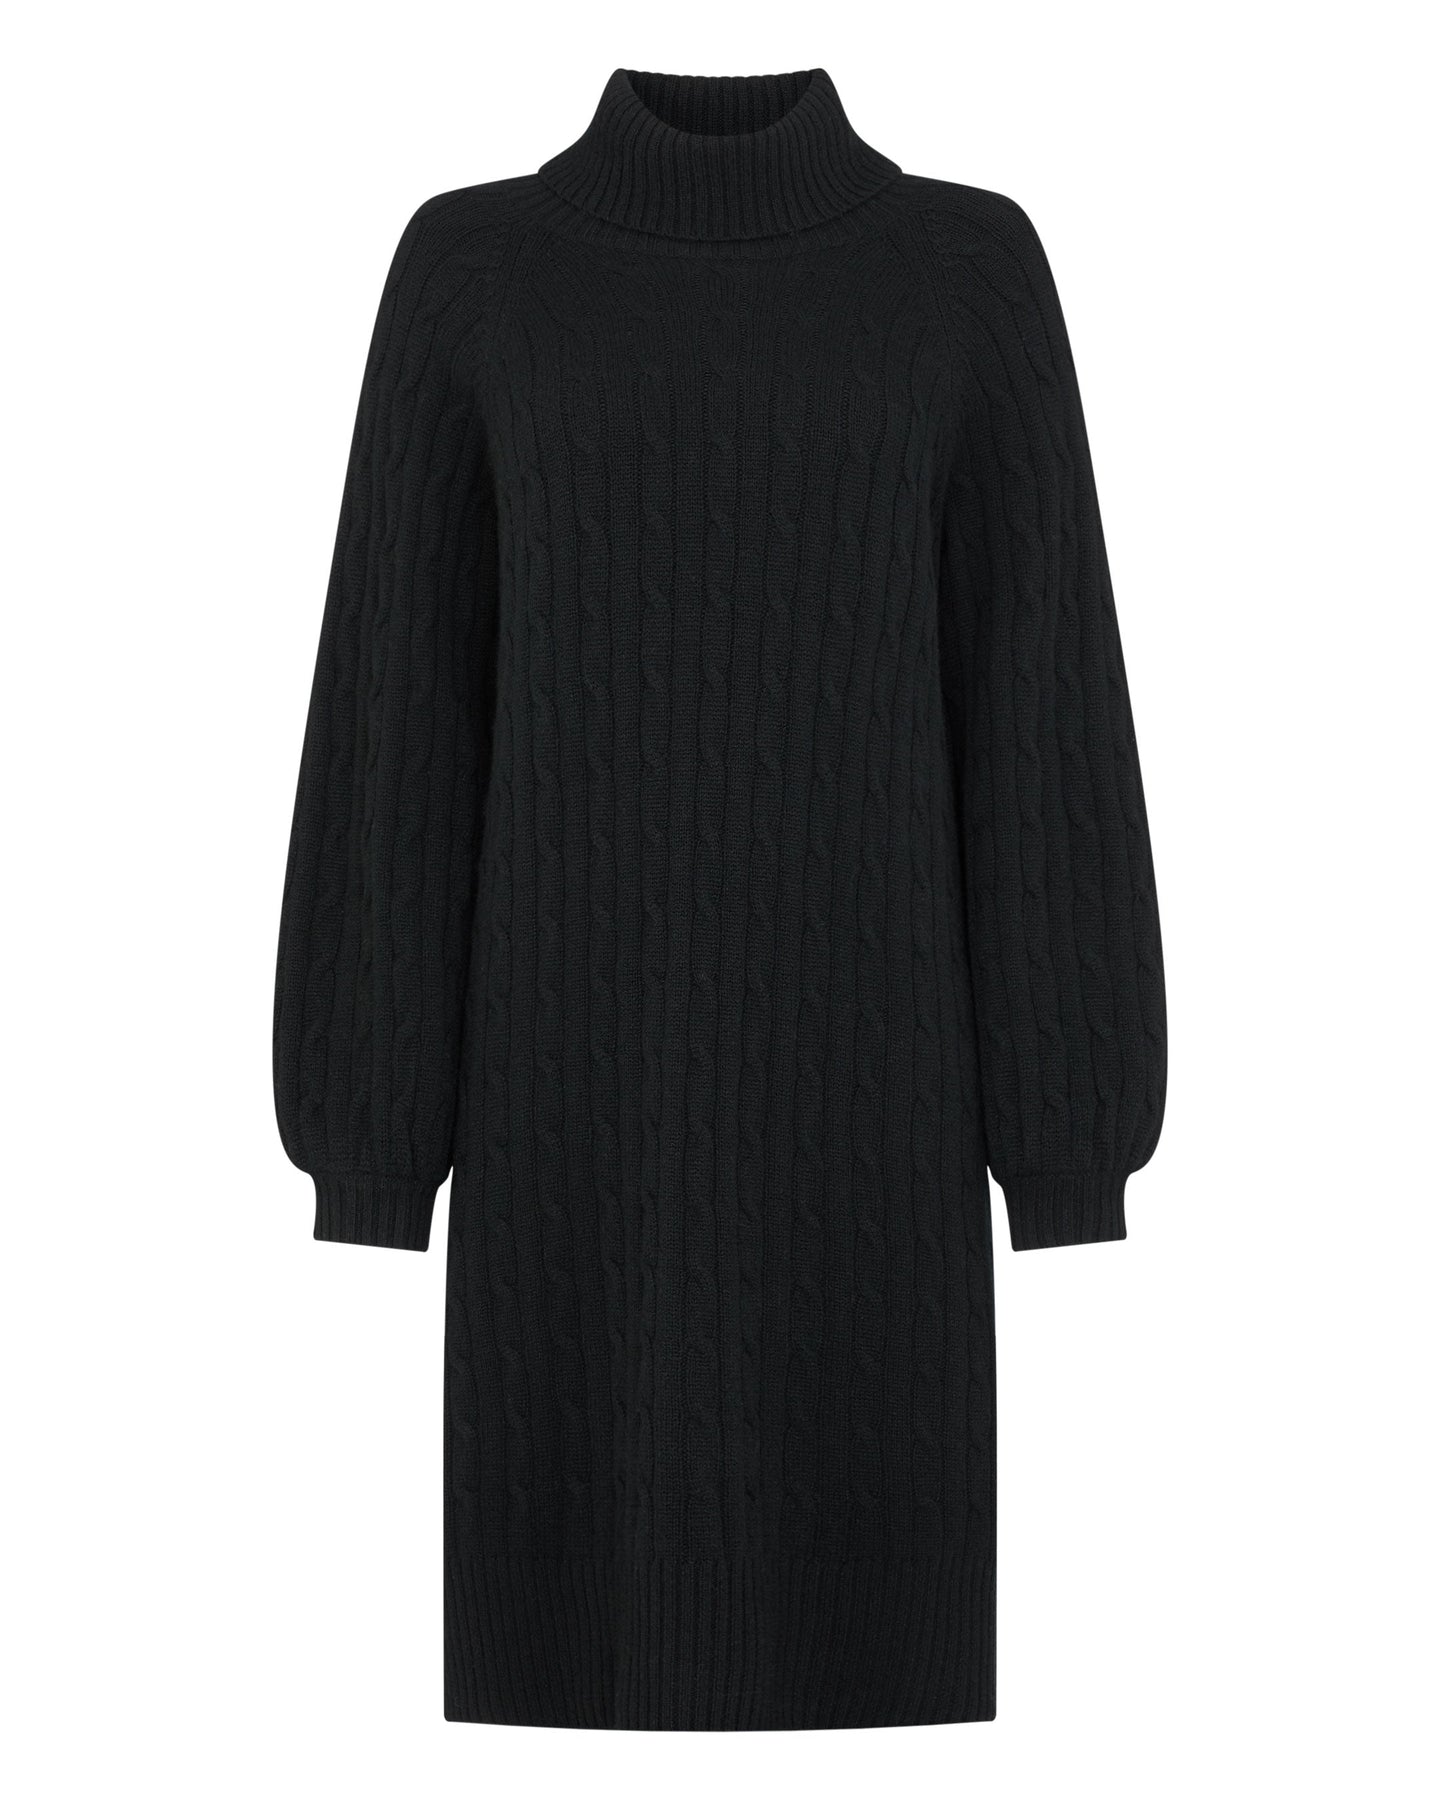 N.Peal Women's Roll Neck Cable Cashmere Dress Black